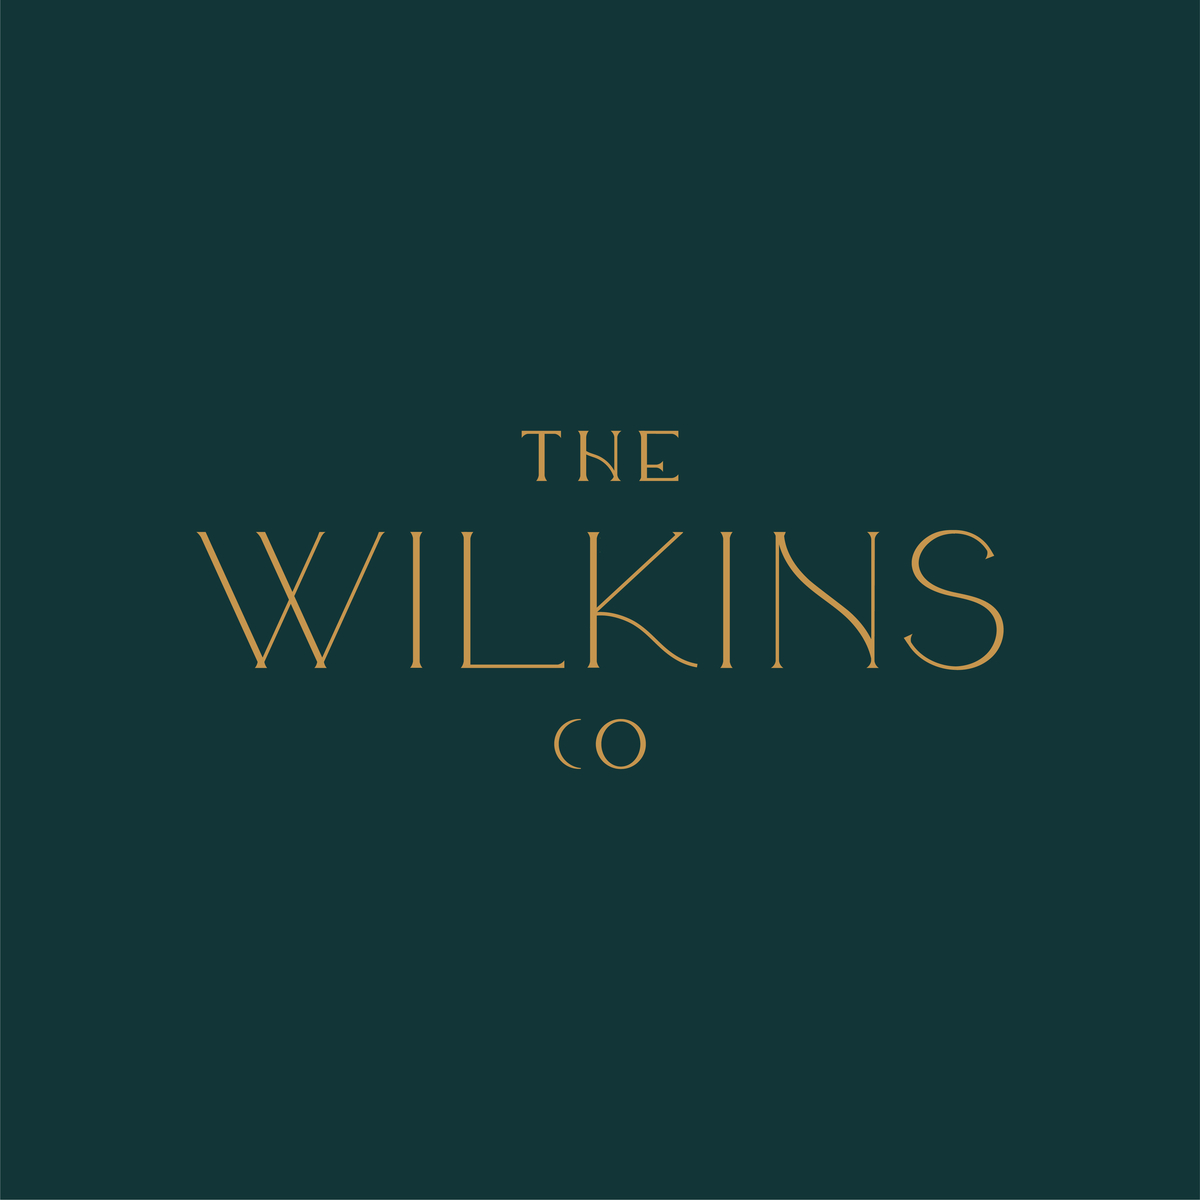 The Wilkins Co Logo Design by Cassidy Dickens on Dribbble